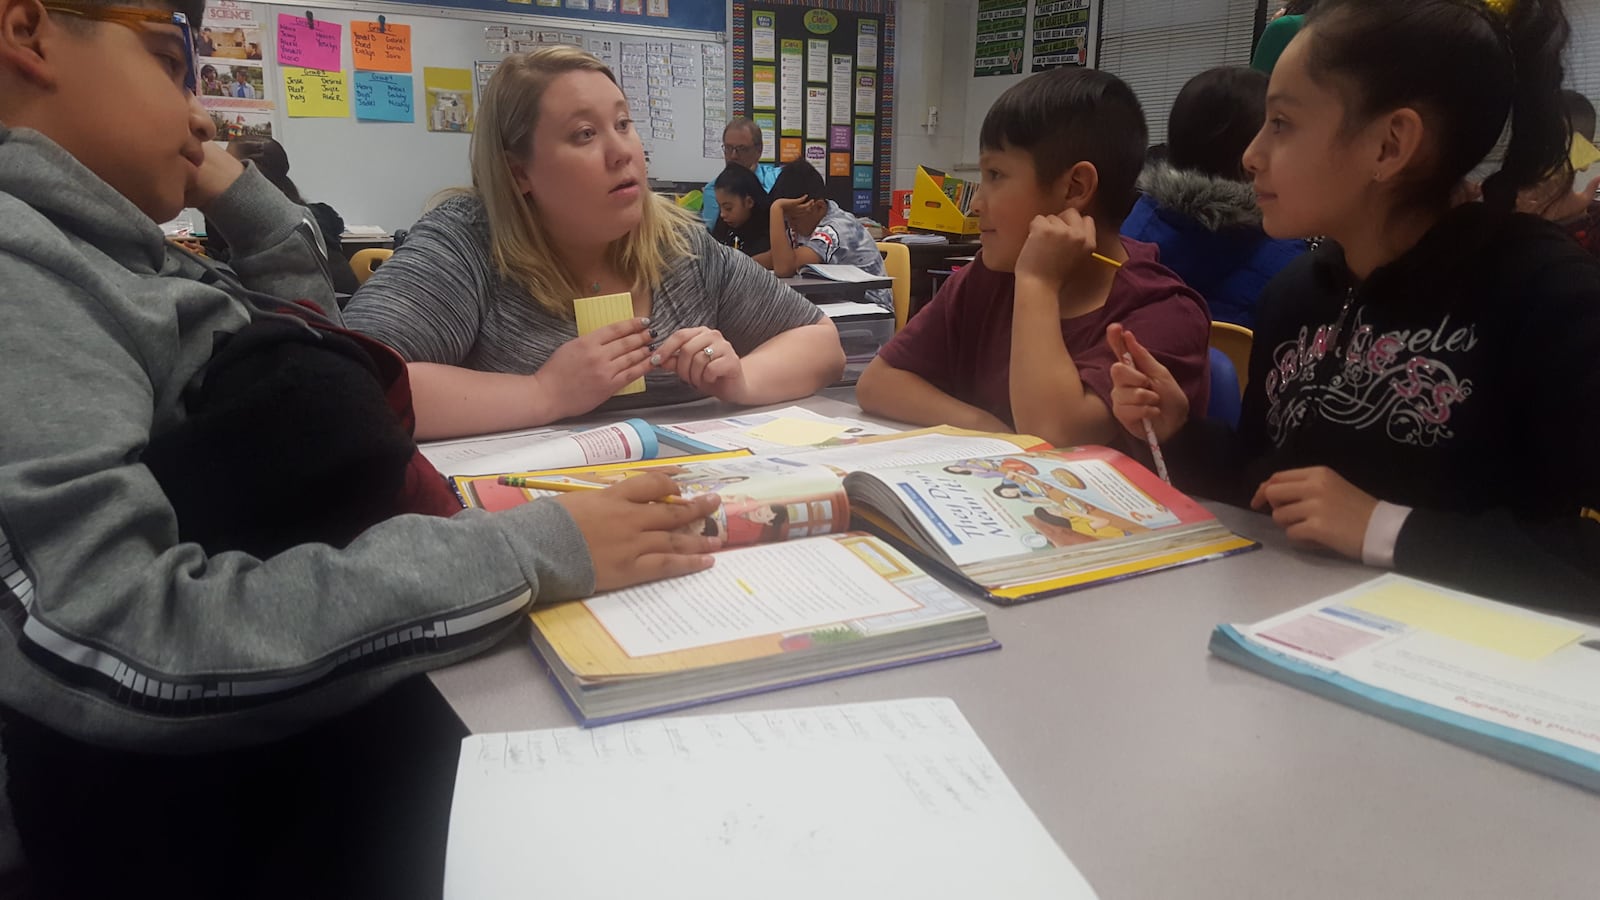 Fifth grade teacher Haley Stratton, talks with her students at Rose Hill Elementary in Adams 14.